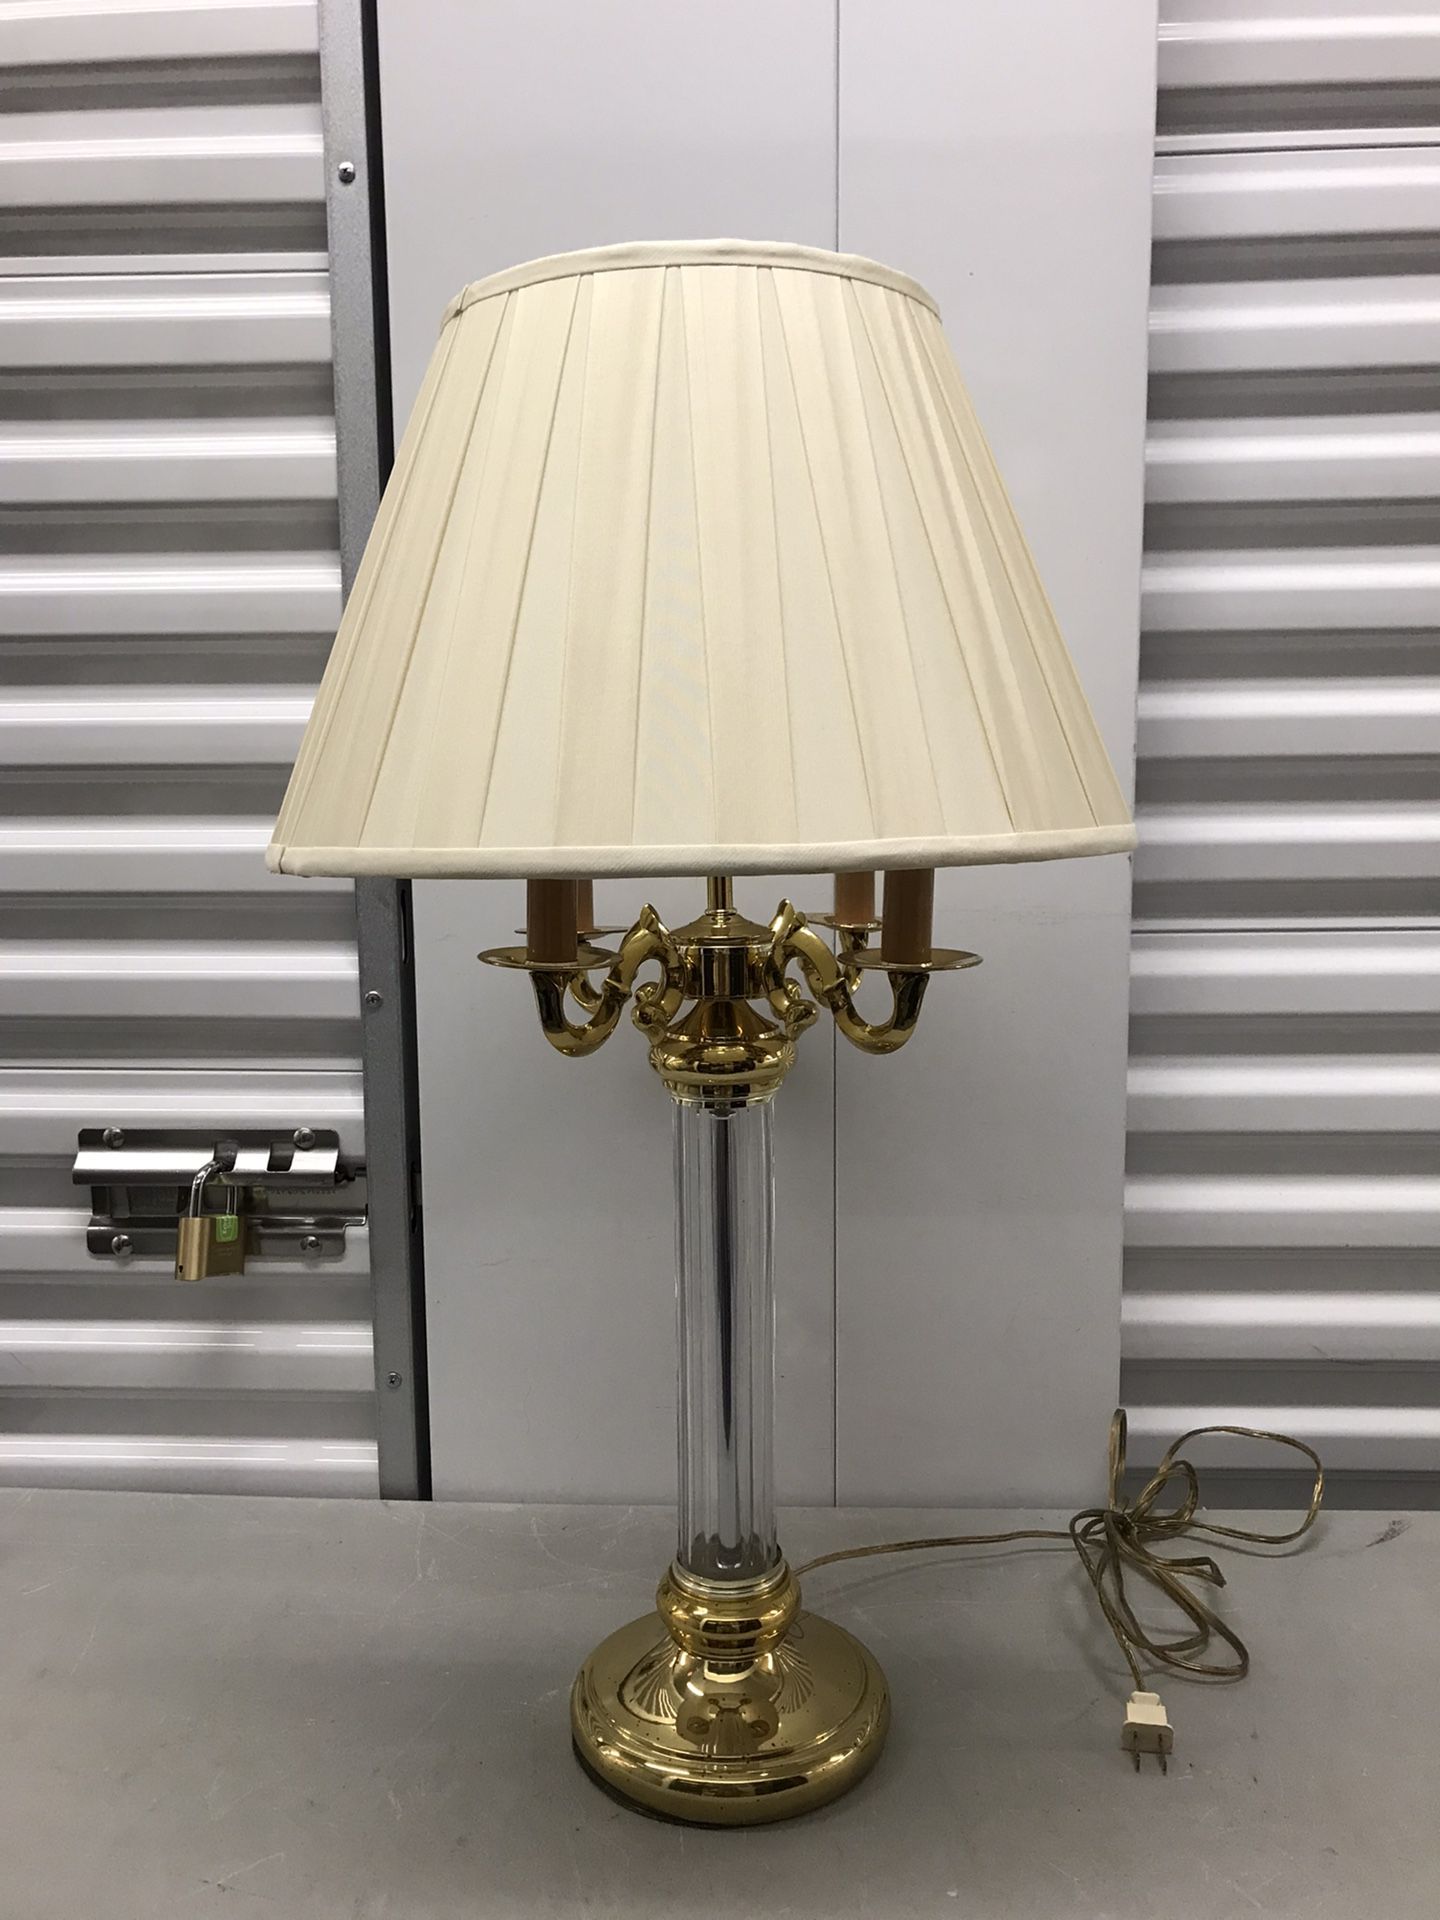 Vintage Candelabra Style Brass Glass Table Lamp 29” Tall